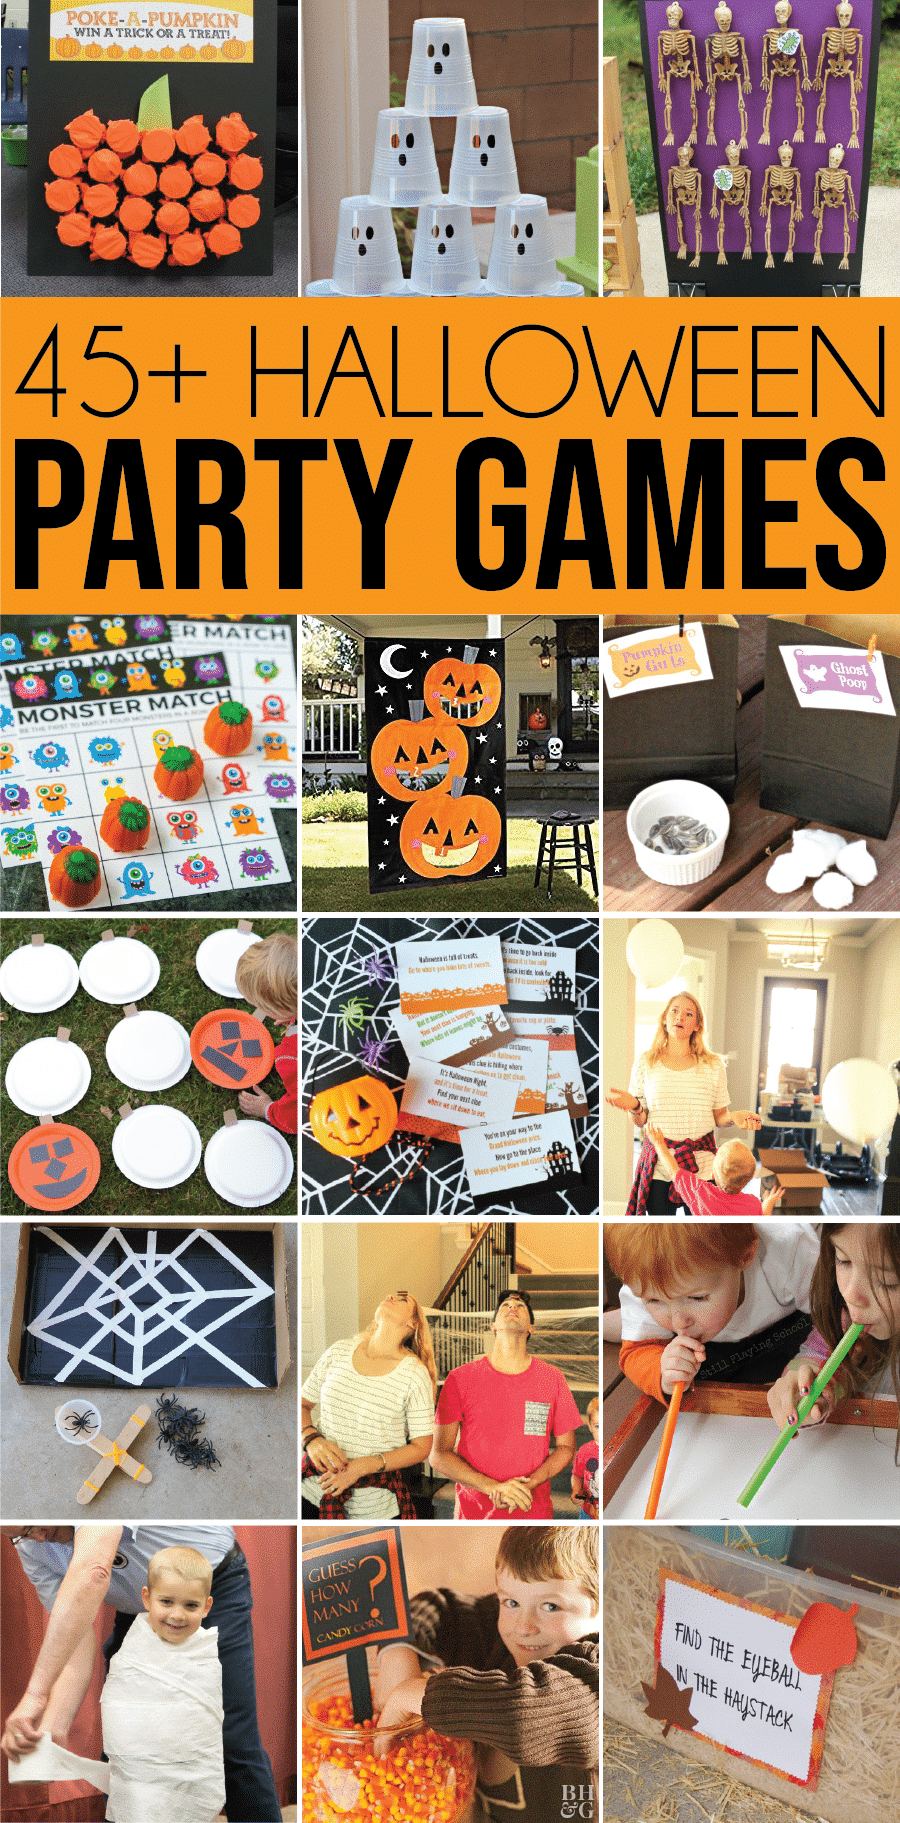 fun-group-activities-for-all-ages-45-fun-indoor-games-for-kids-of